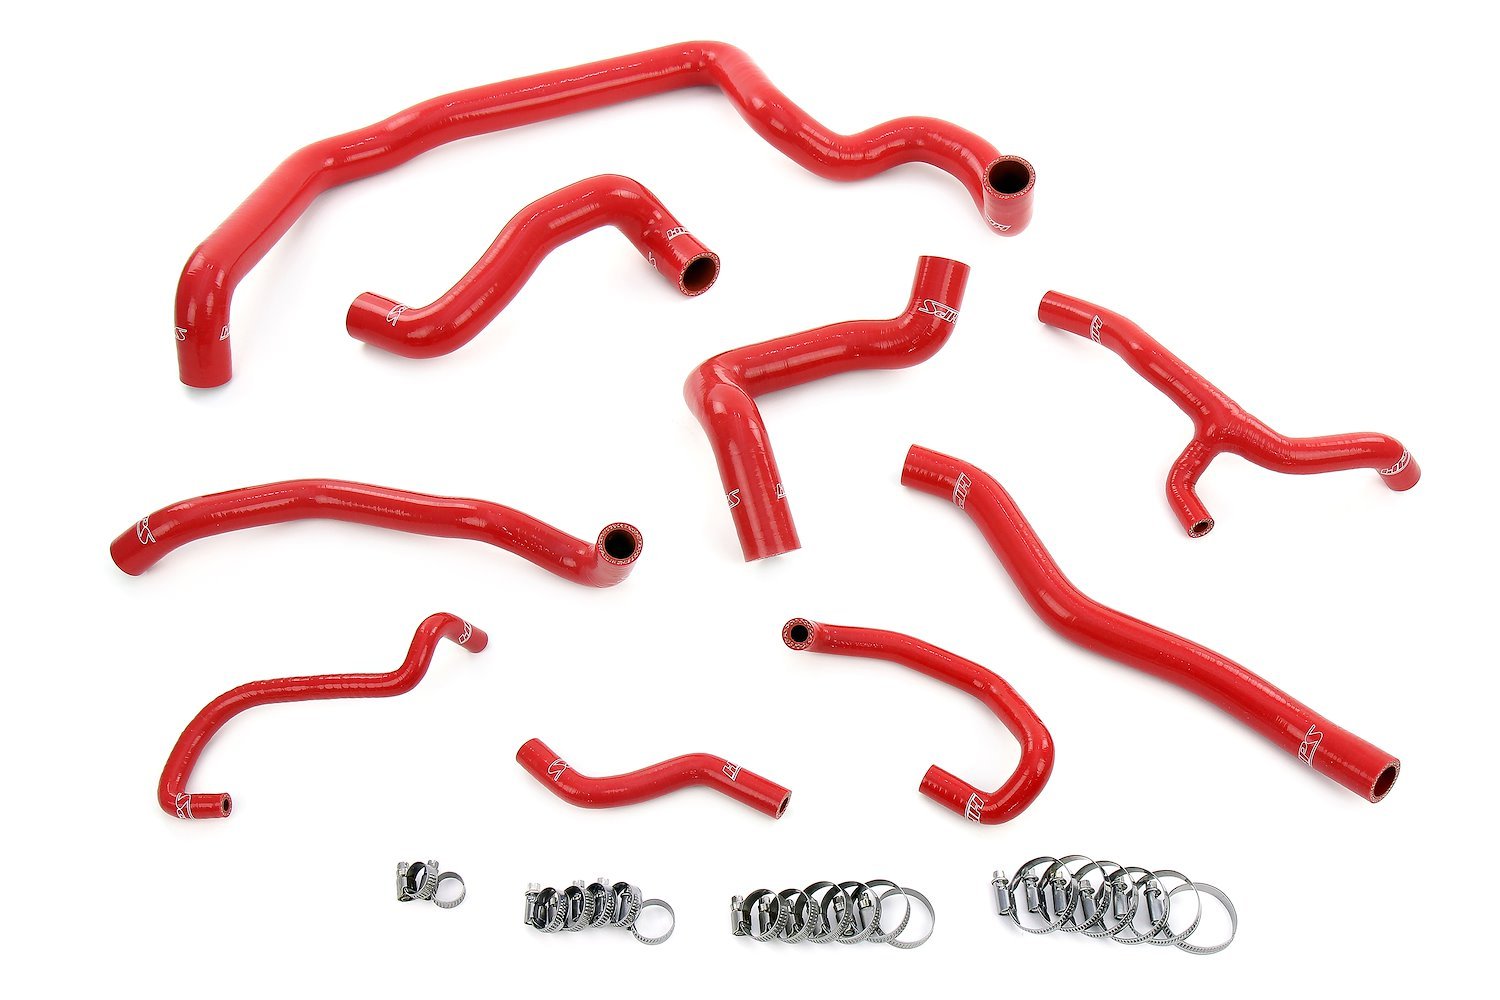 57-1997-RED Coolant Hose Kit, 3-Ply Reinforced Silicone Hoses, For Radiator, Heater, Water Pump, Expansion Tank